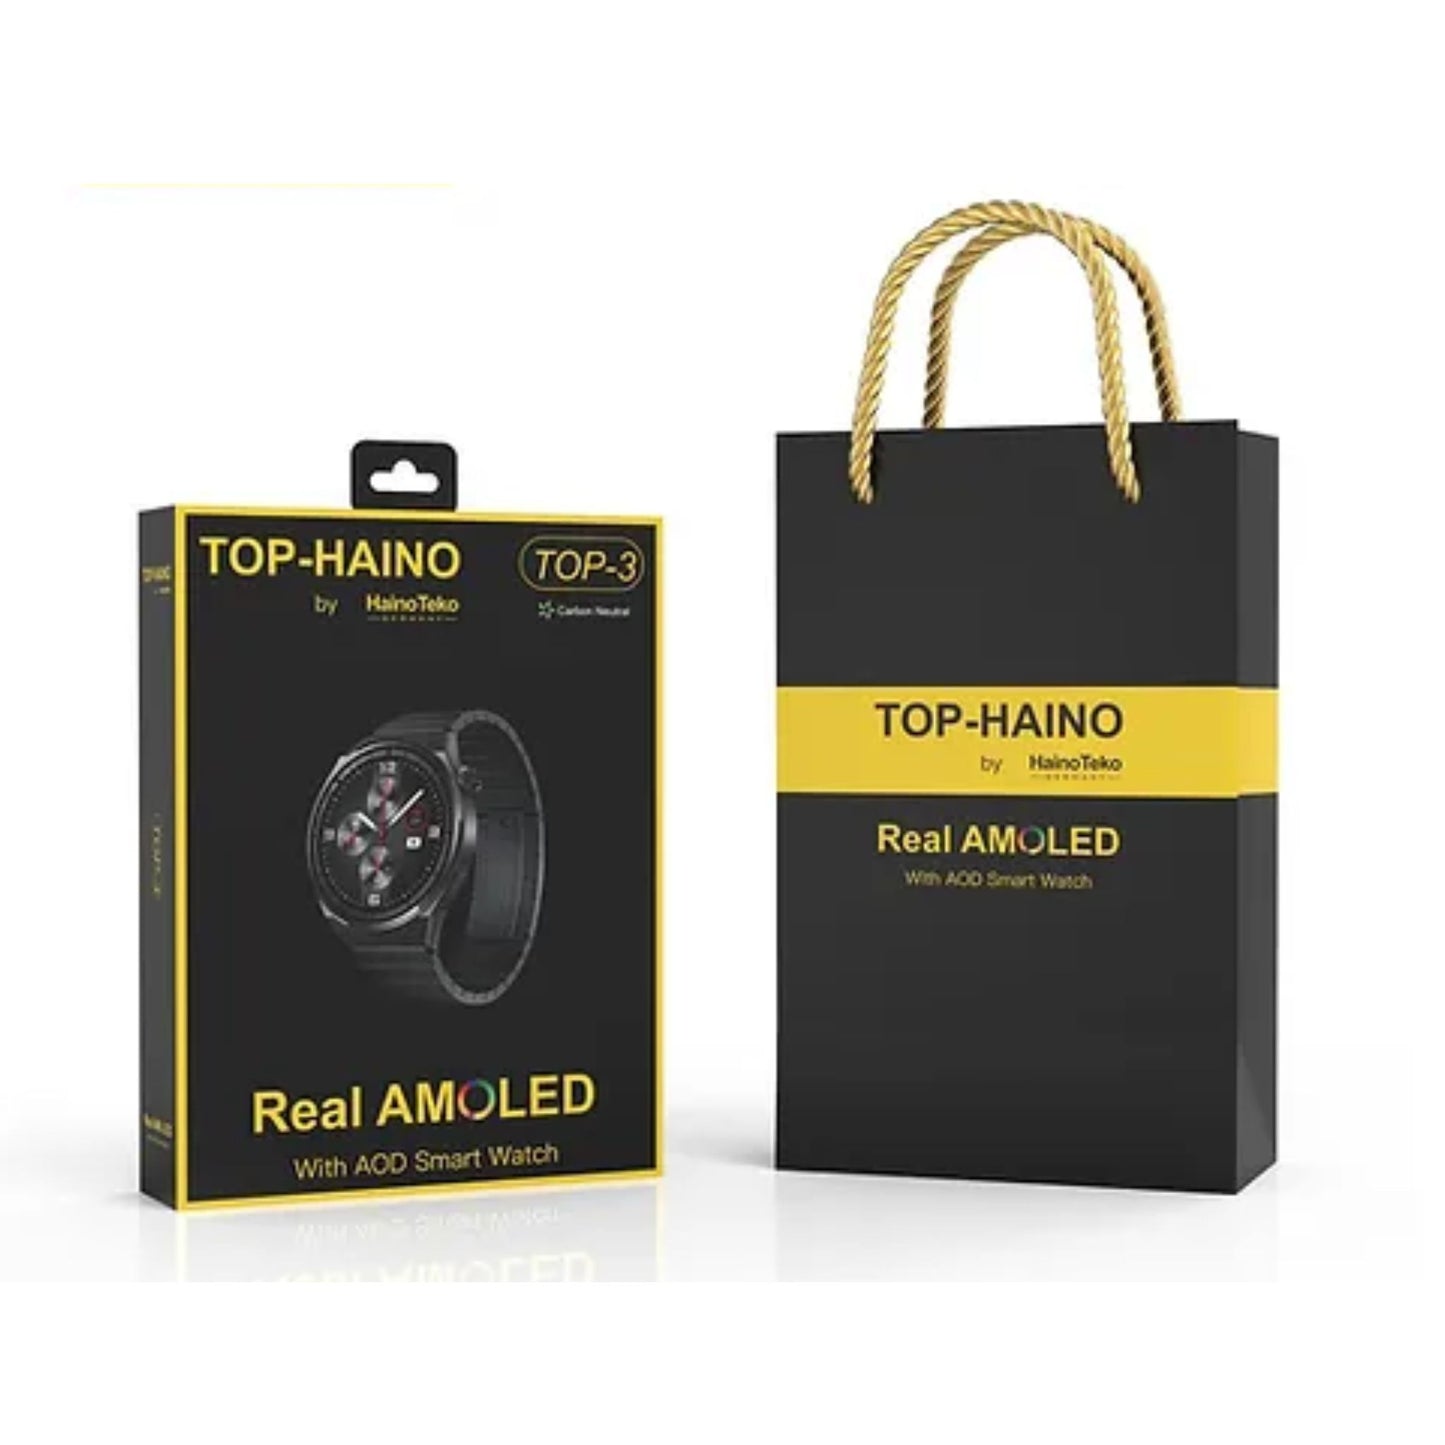 Premium Haino Teko Germany TOP 3 Full Screen Real AMOLED Display Series 9_3 Pair Straps Wireless Charger and Pen Designed For Unisex Adults_Black